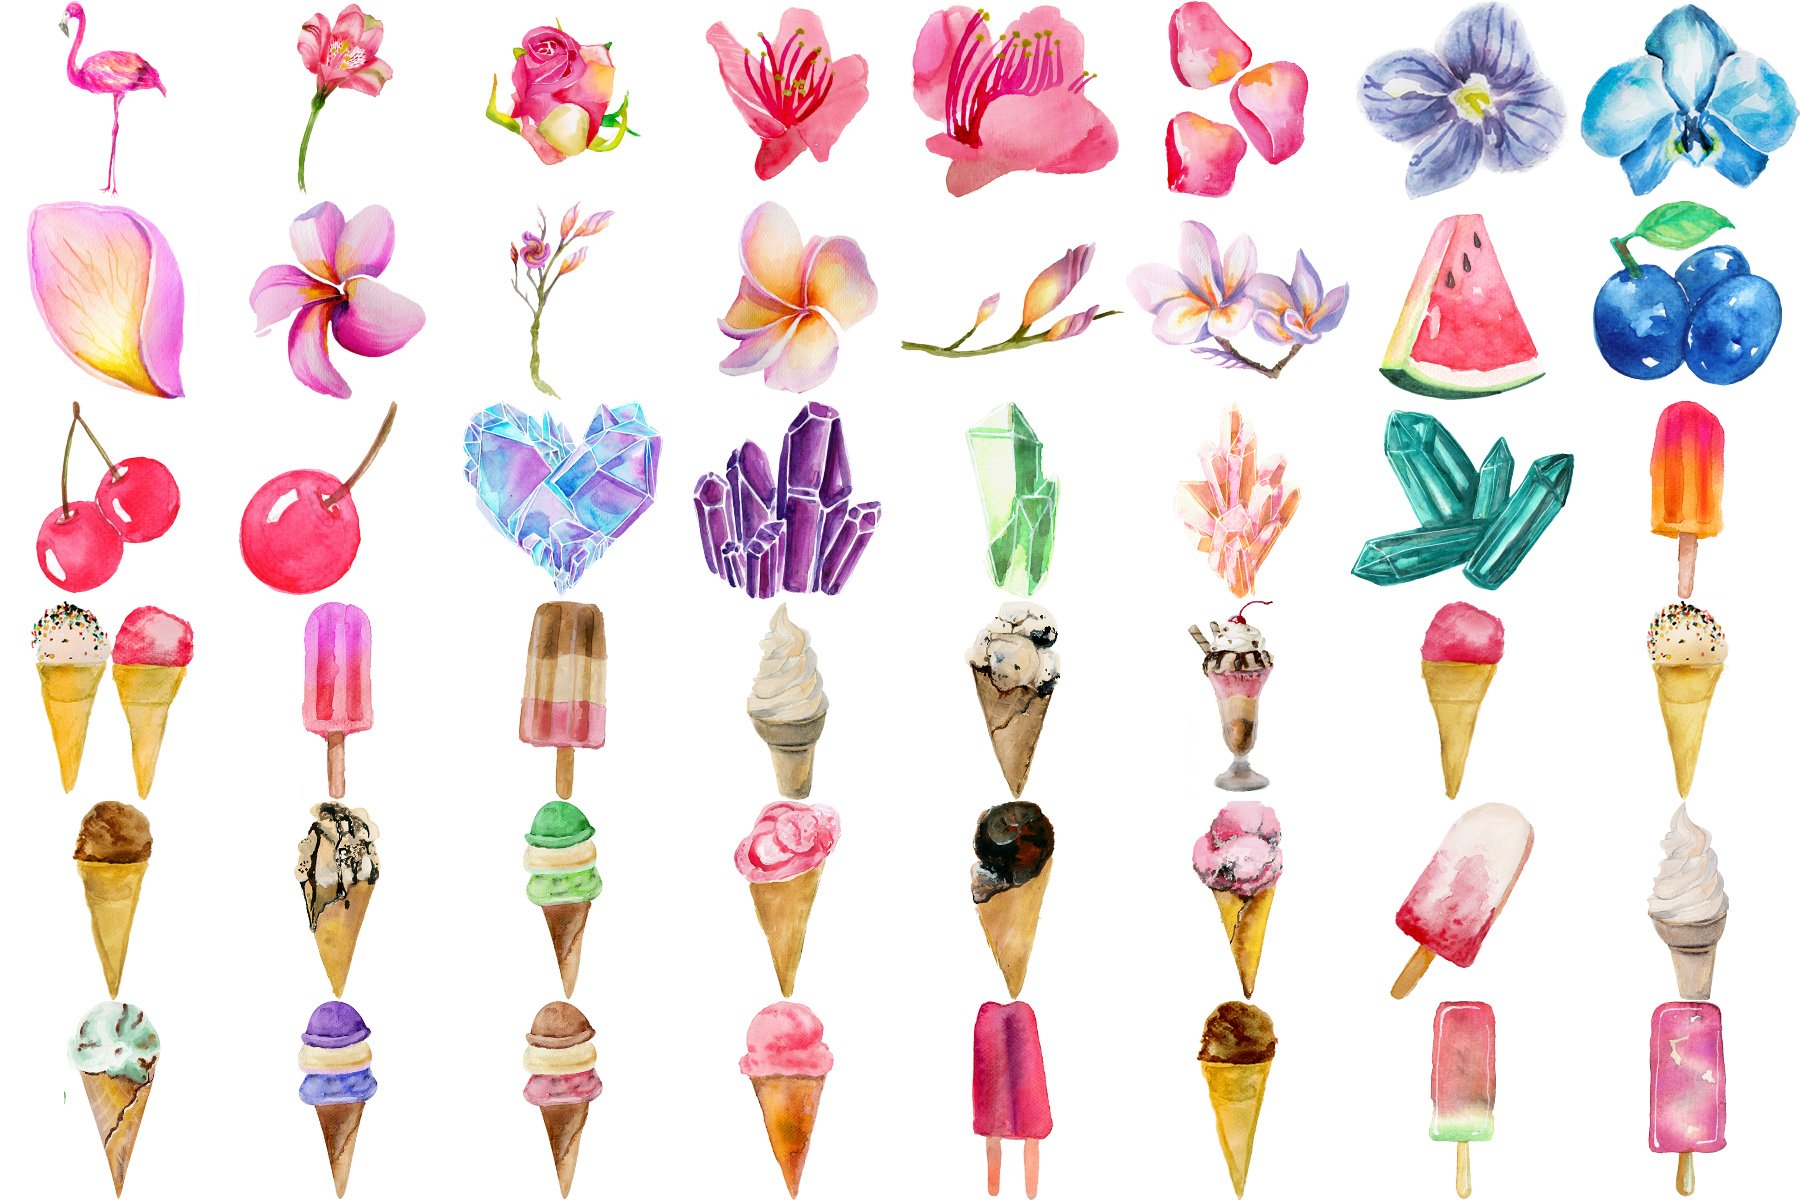 Ice creams with the flowers.